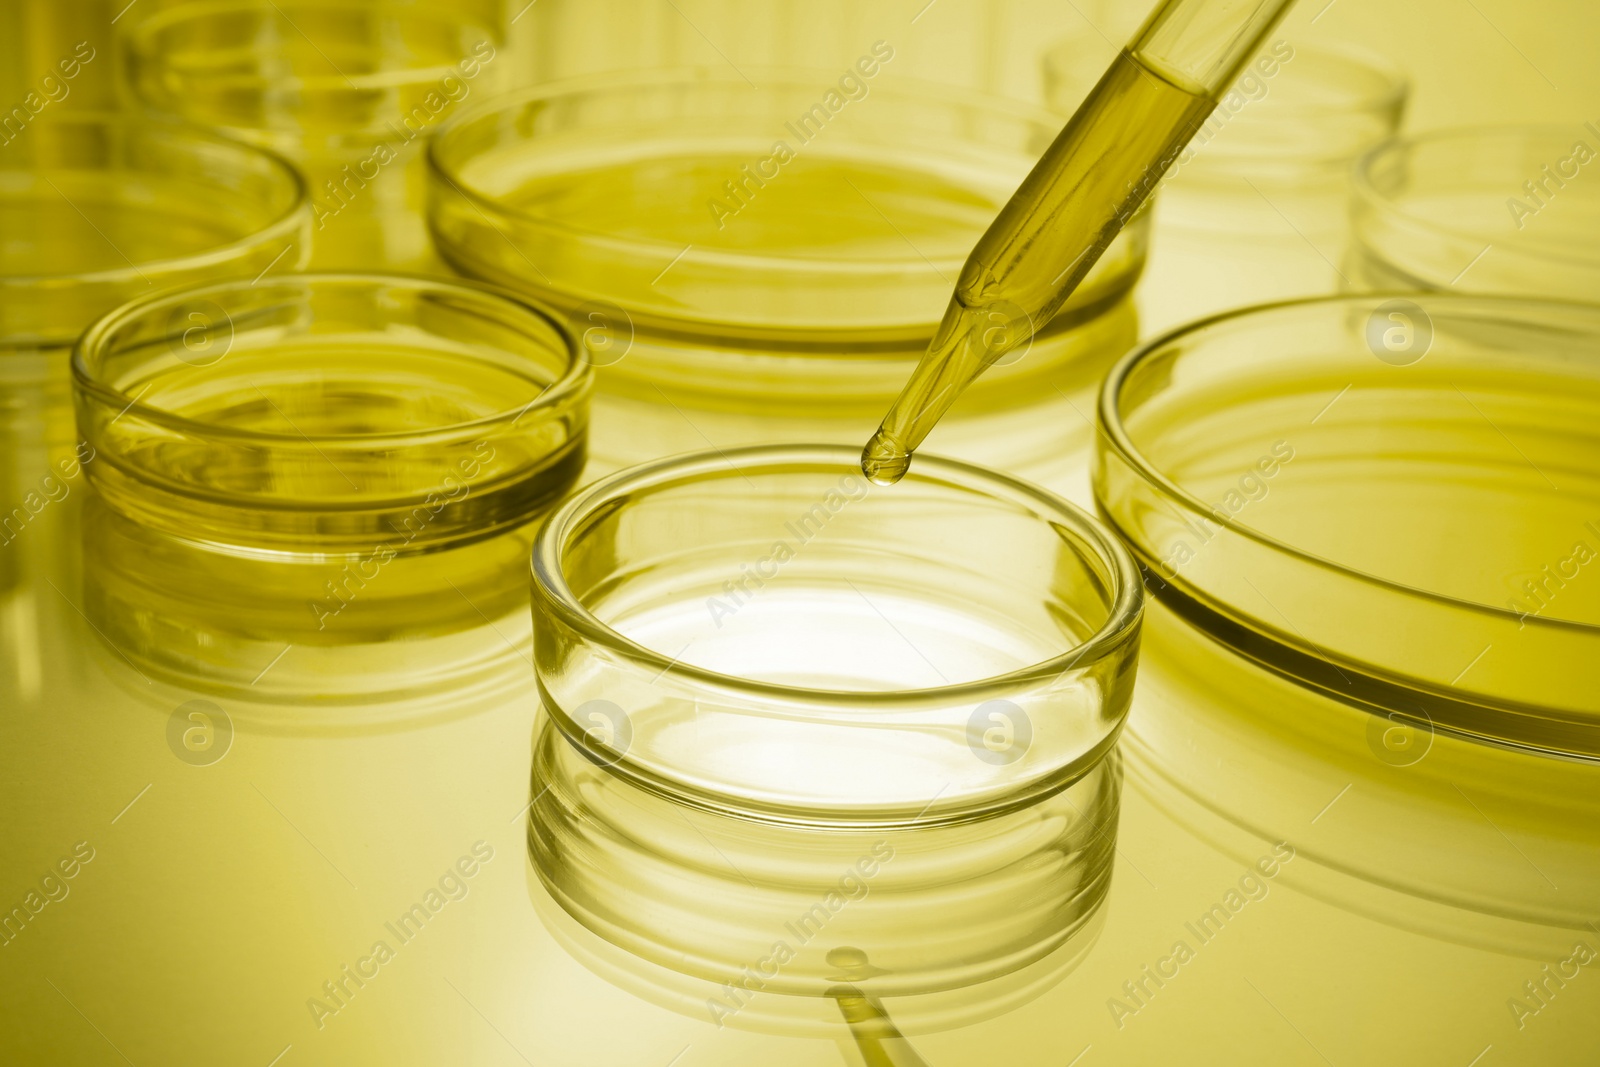 Image of Dropping reagent into Petri dish with liquid on table, toned in yellow. Laboratory glassware